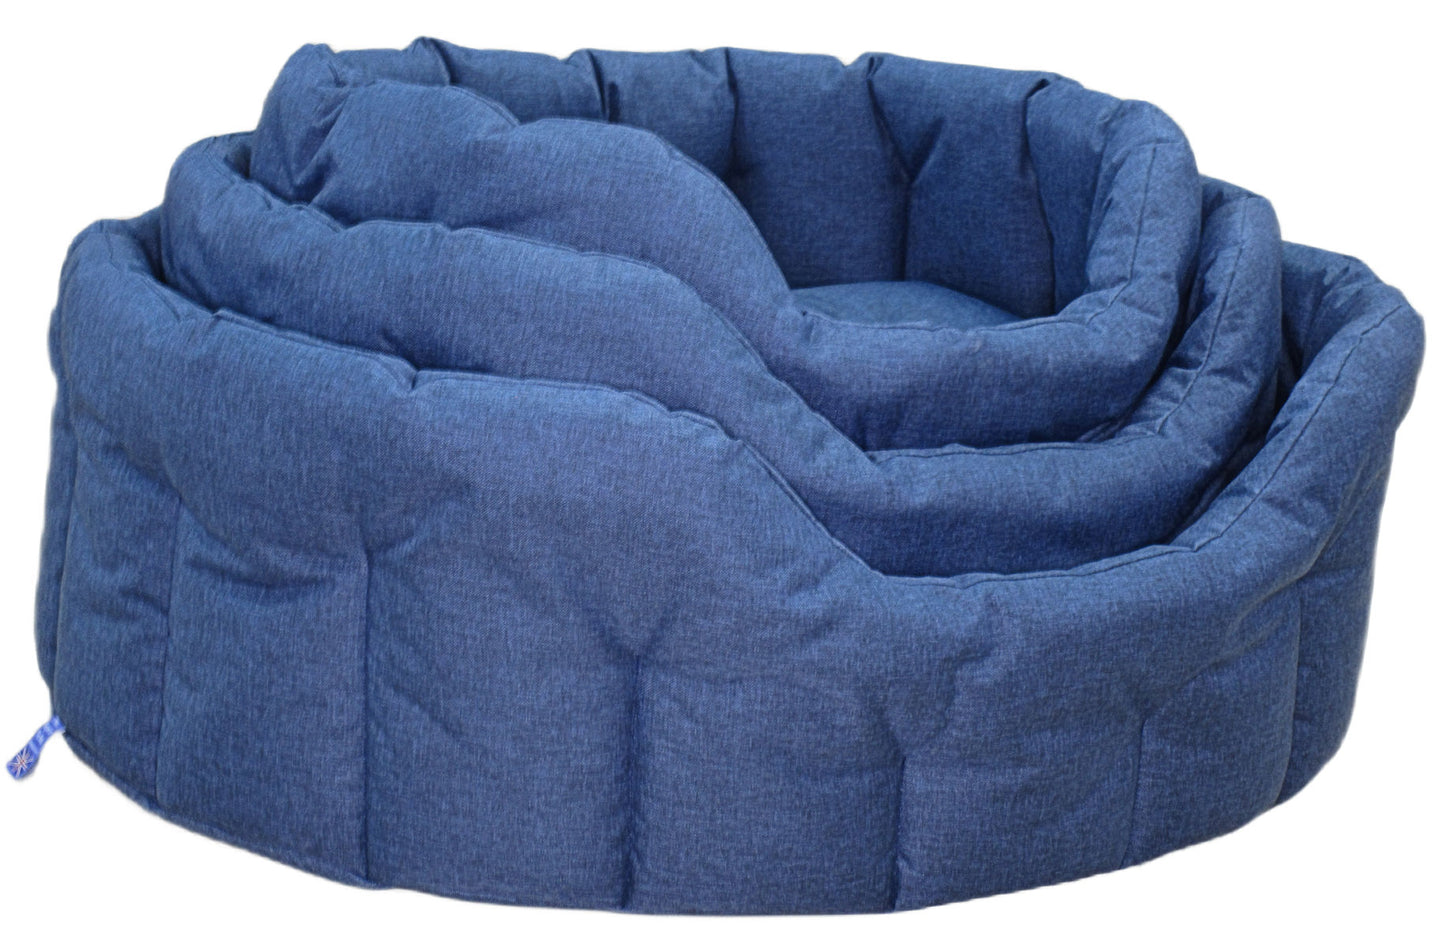 P&L Country Dog - Heavy Duty Oval Waterproof - Softee Beds